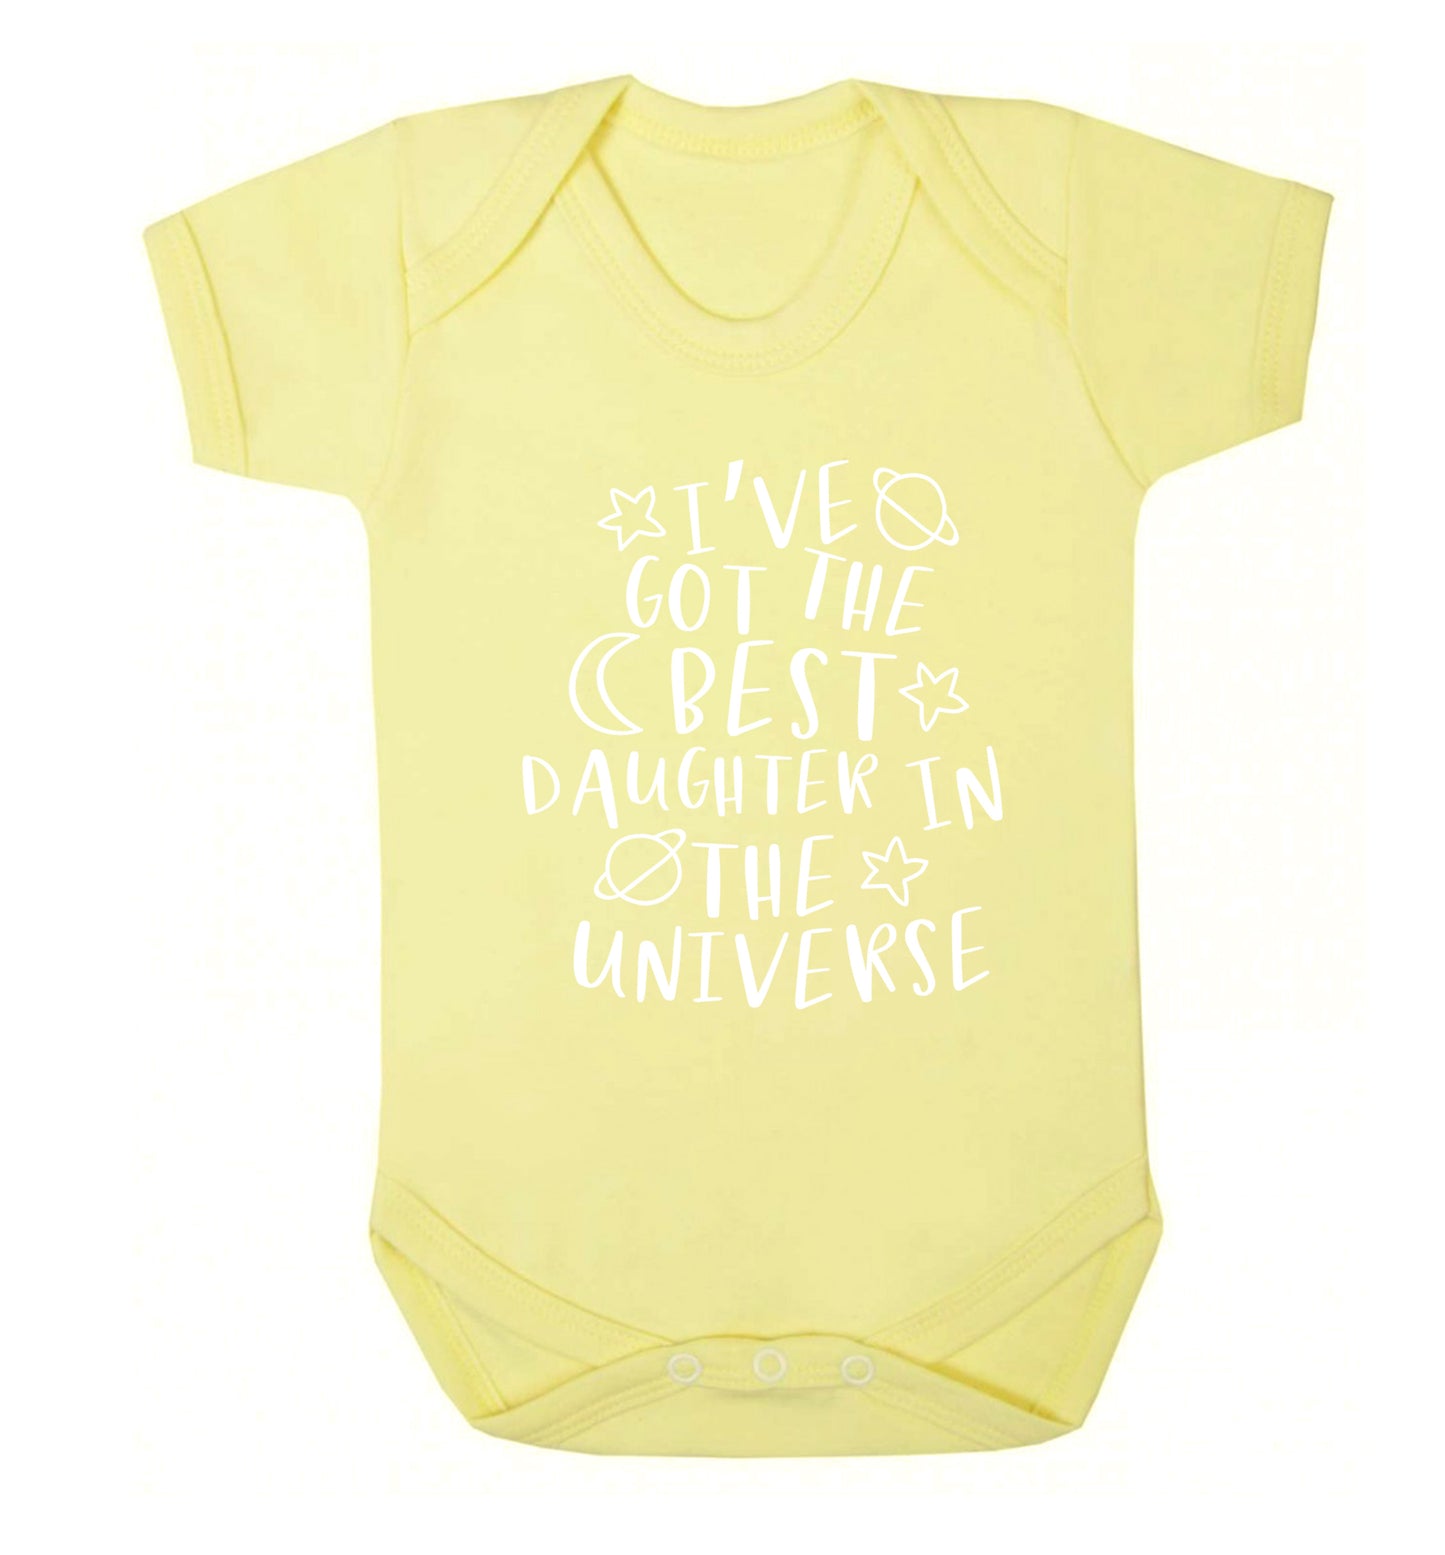 I've got the best daughter in the universe Baby Vest pale yellow 18-24 months